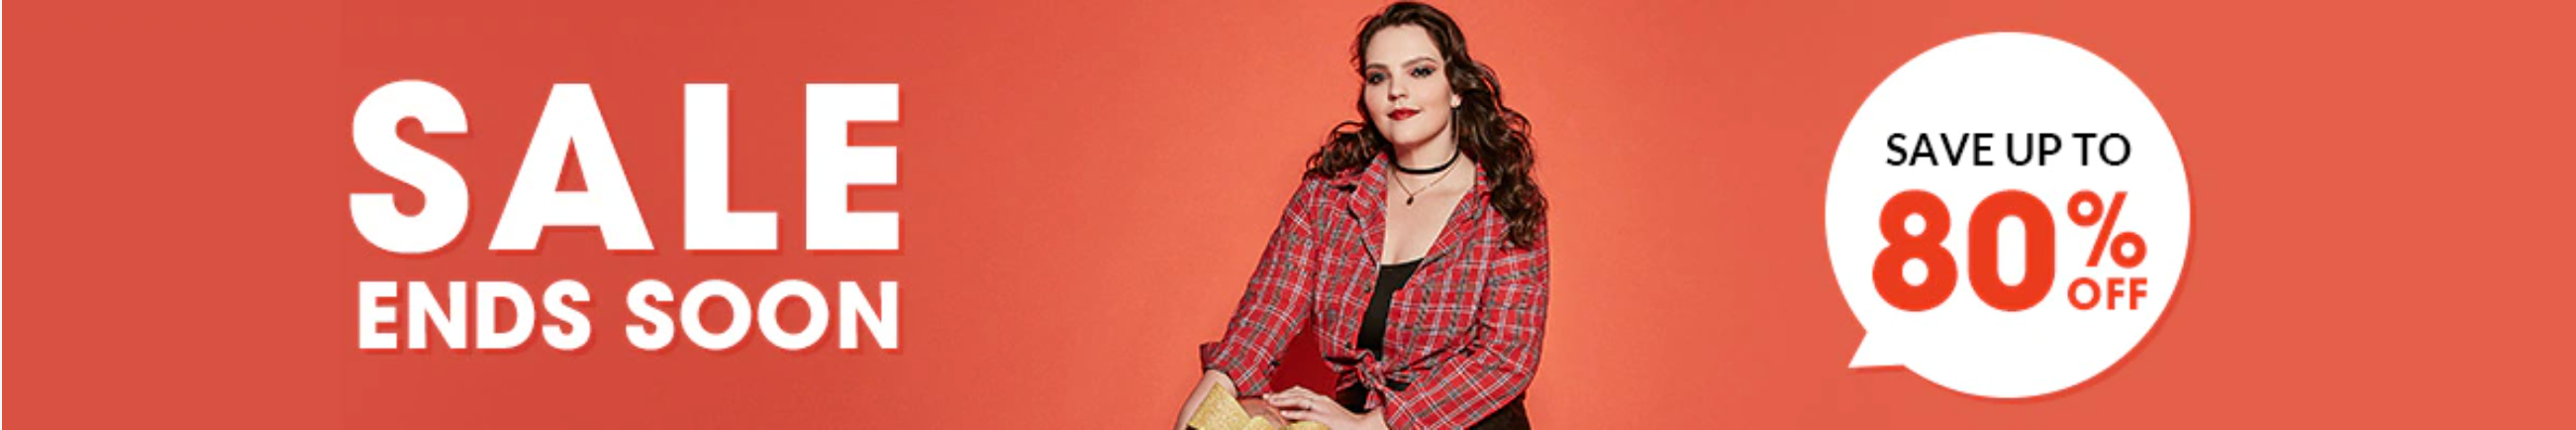 RoseGal RoseGal: Sale up to 80% off plus size clothing